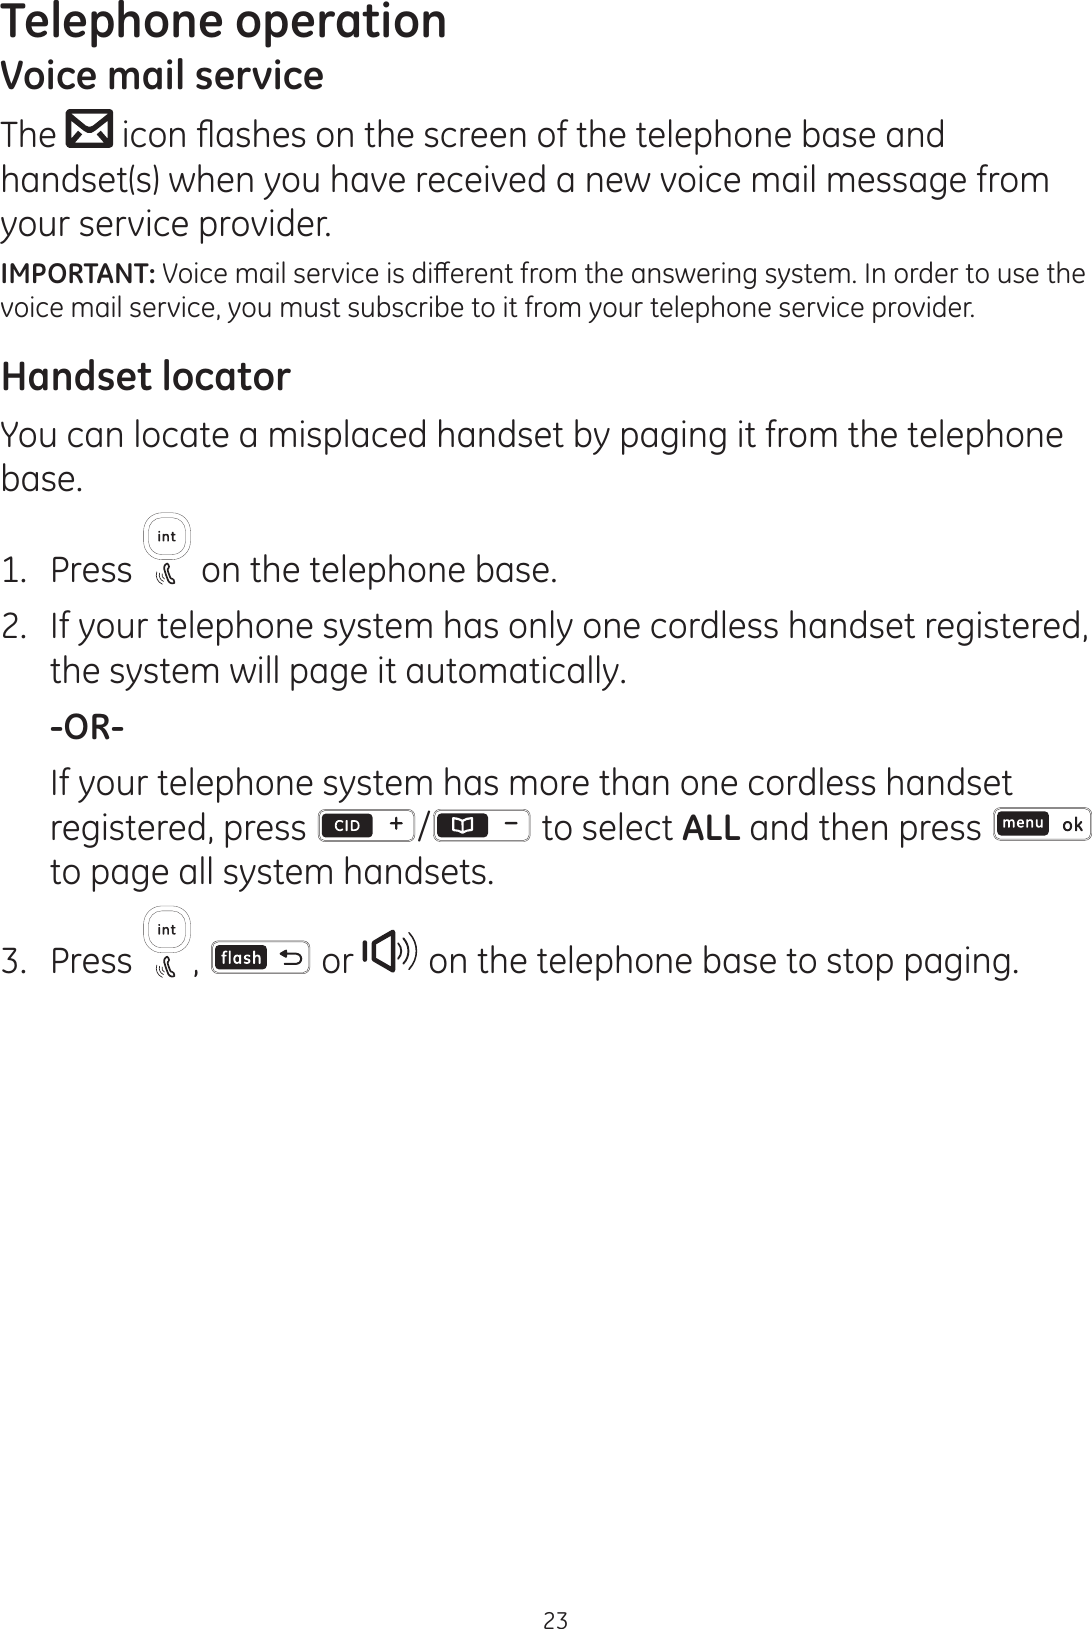 Telephone operation23Voice mail serviceThe  LFRQÀDVKHVRQWKHVFUHHQRIWKHWHOHSKRQHEDVHDQGhandset(s) when you have received a new voice mail message from your service provider. IMPORTANT:9RLFHPDLOVHUYLFHLVGLȺHUHQWIURPWKHDQVZHULQJV\VWHP,QRUGHUWRXVHWKHvoice mail service, you must subscribe to it from your telephone service provider.Handset locatorYou can locate a misplaced handset by paging it from the telephone base.1.  Press  on the telephone base. 2.  If your telephone system has only one cordless handset registered, the system will page it automatically. -OR-   If your telephone system has more than one cordless handset registered, press  /  to select ALL and then press   to page all system handsets. 3.  Press  ,   or   on the telephone base to stop paging.